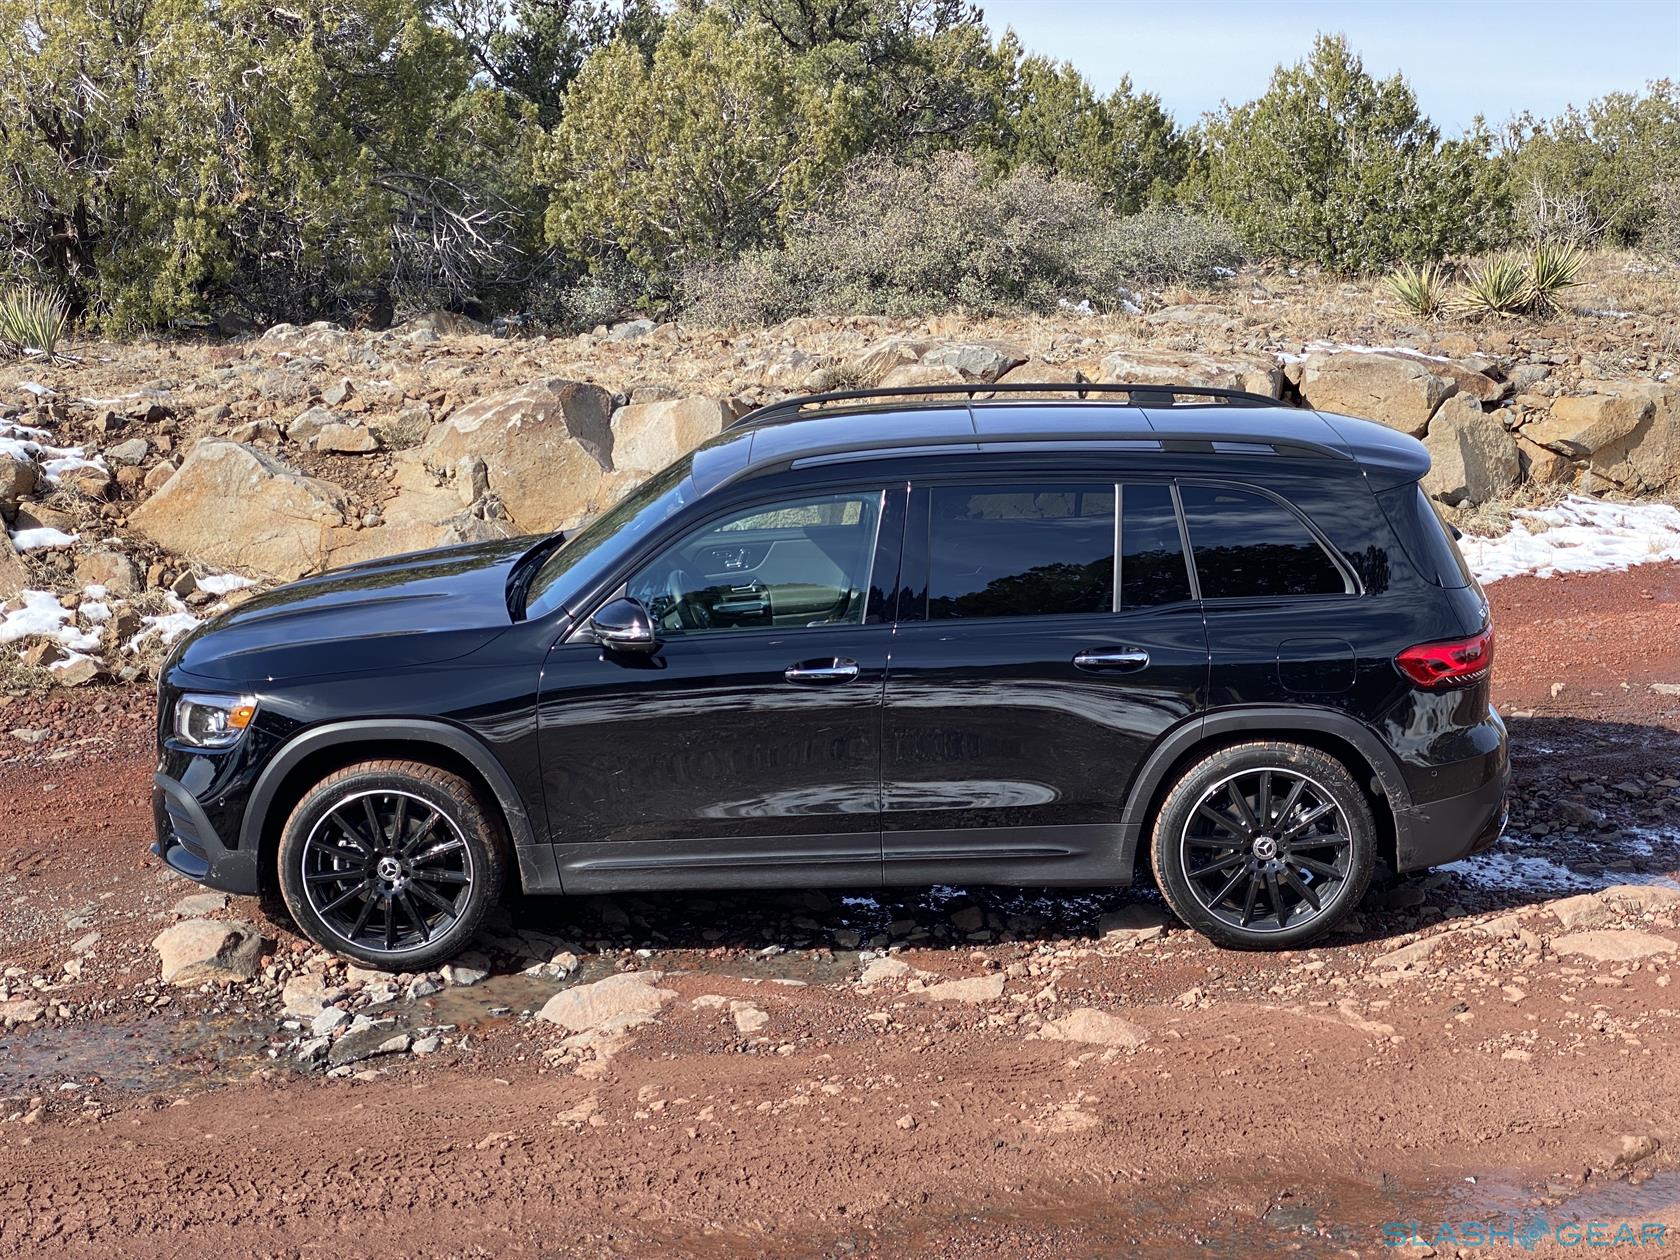 2020 Mercedes Benz Glb First Drive Review 3 Row Suv Is